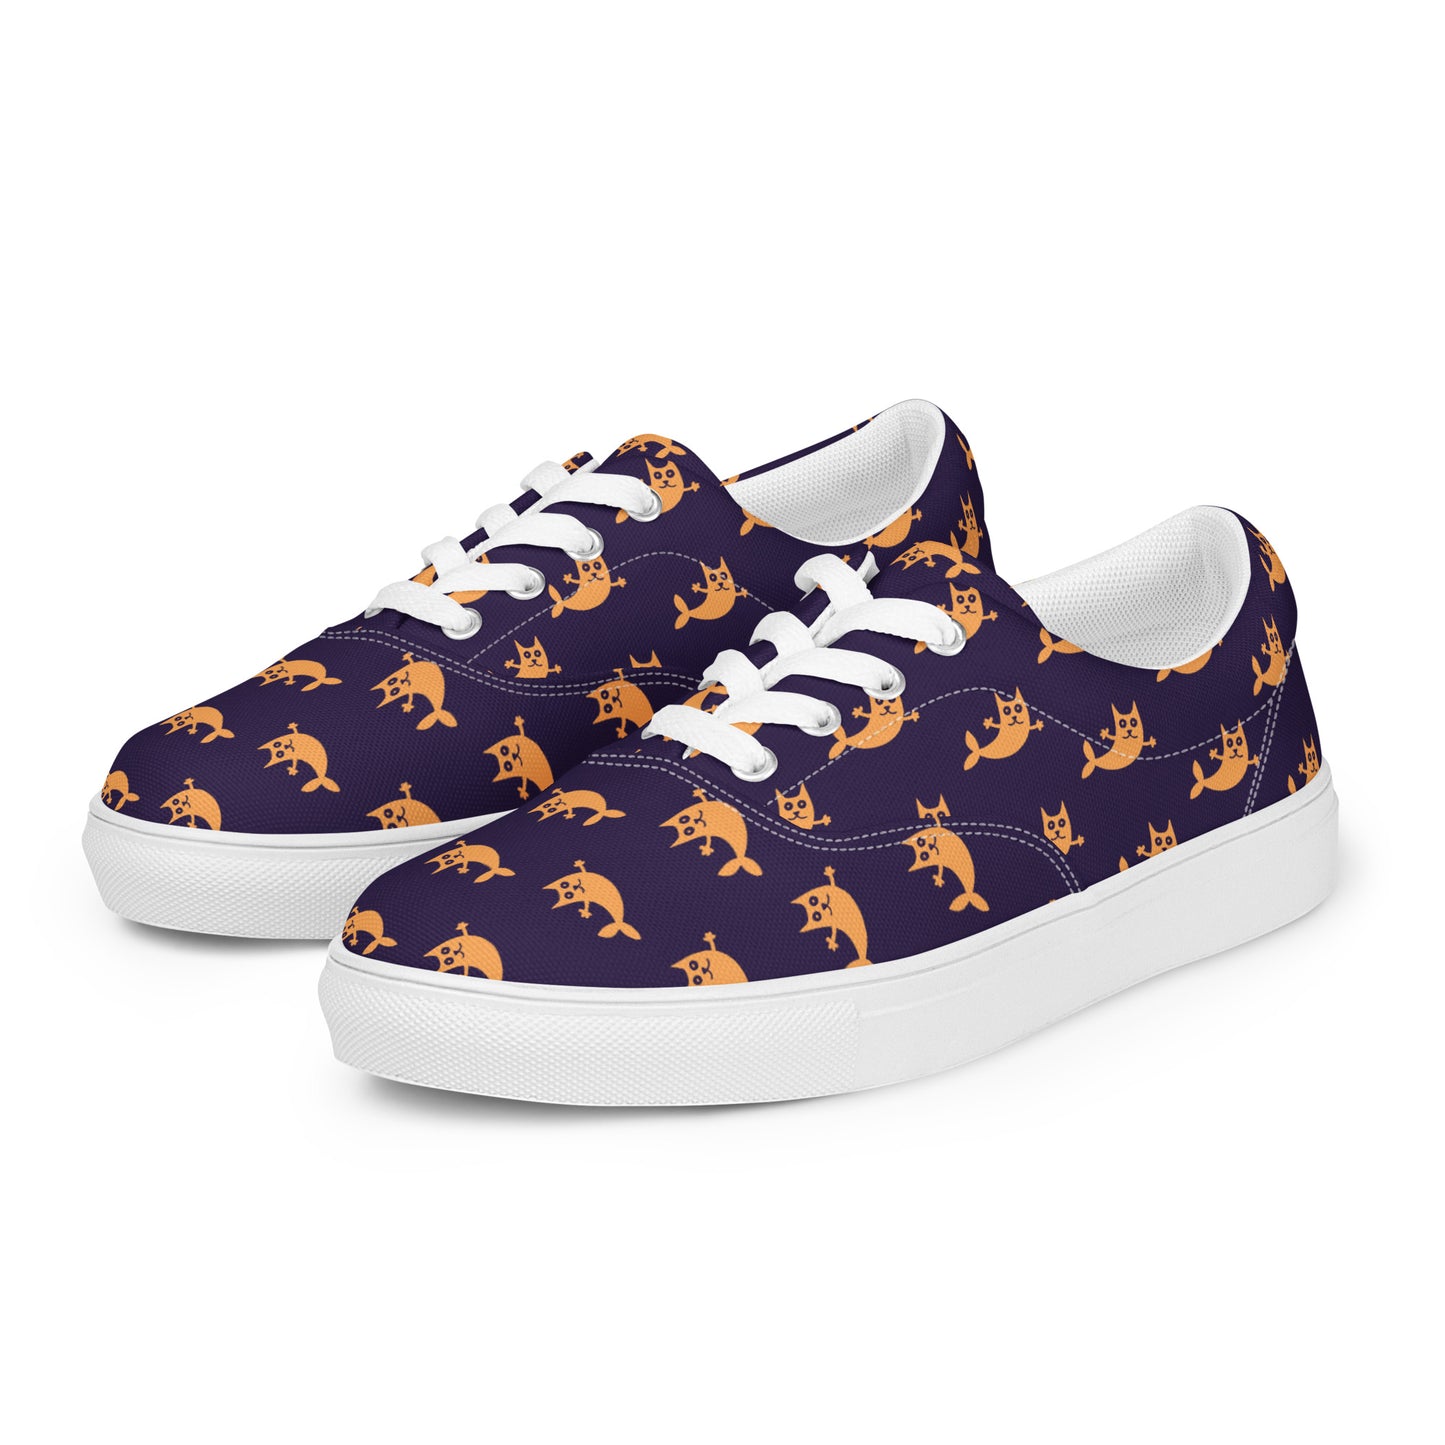 Mer-Kitty Women’s Handmade Lace-up Canvas Skater Shoes